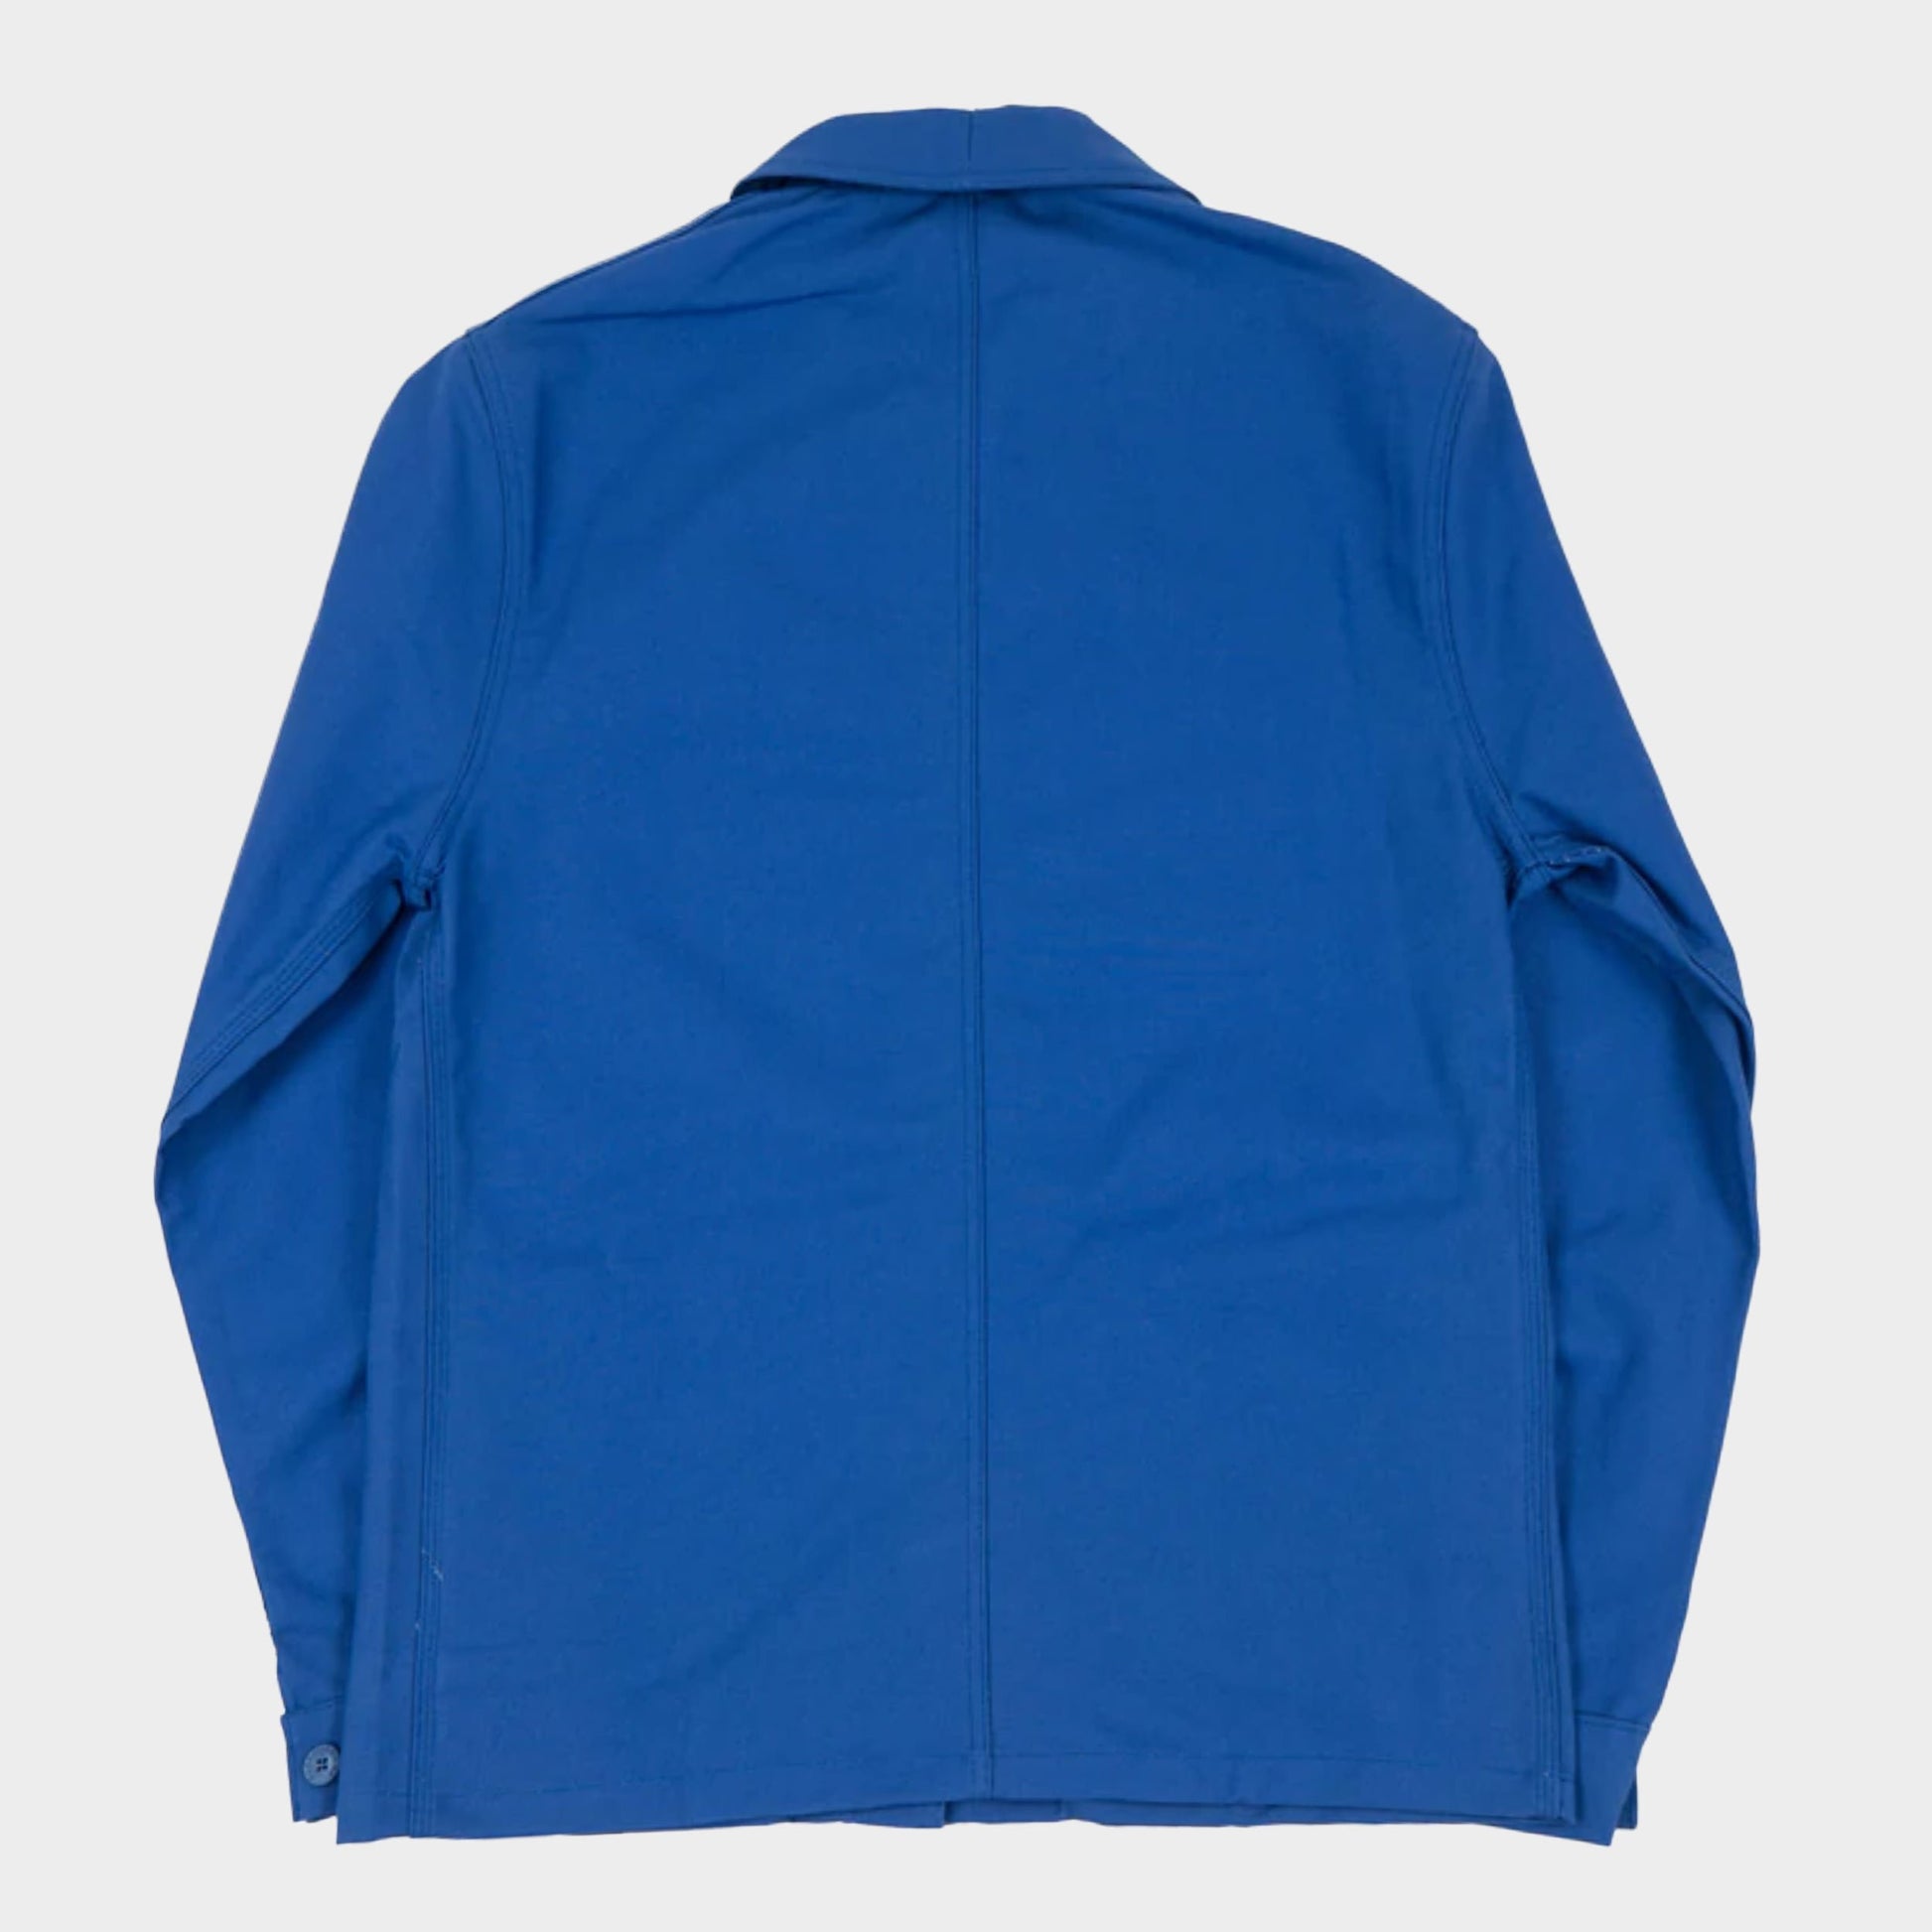 Le Laboureur French Cotton Work Jacket in French Blue